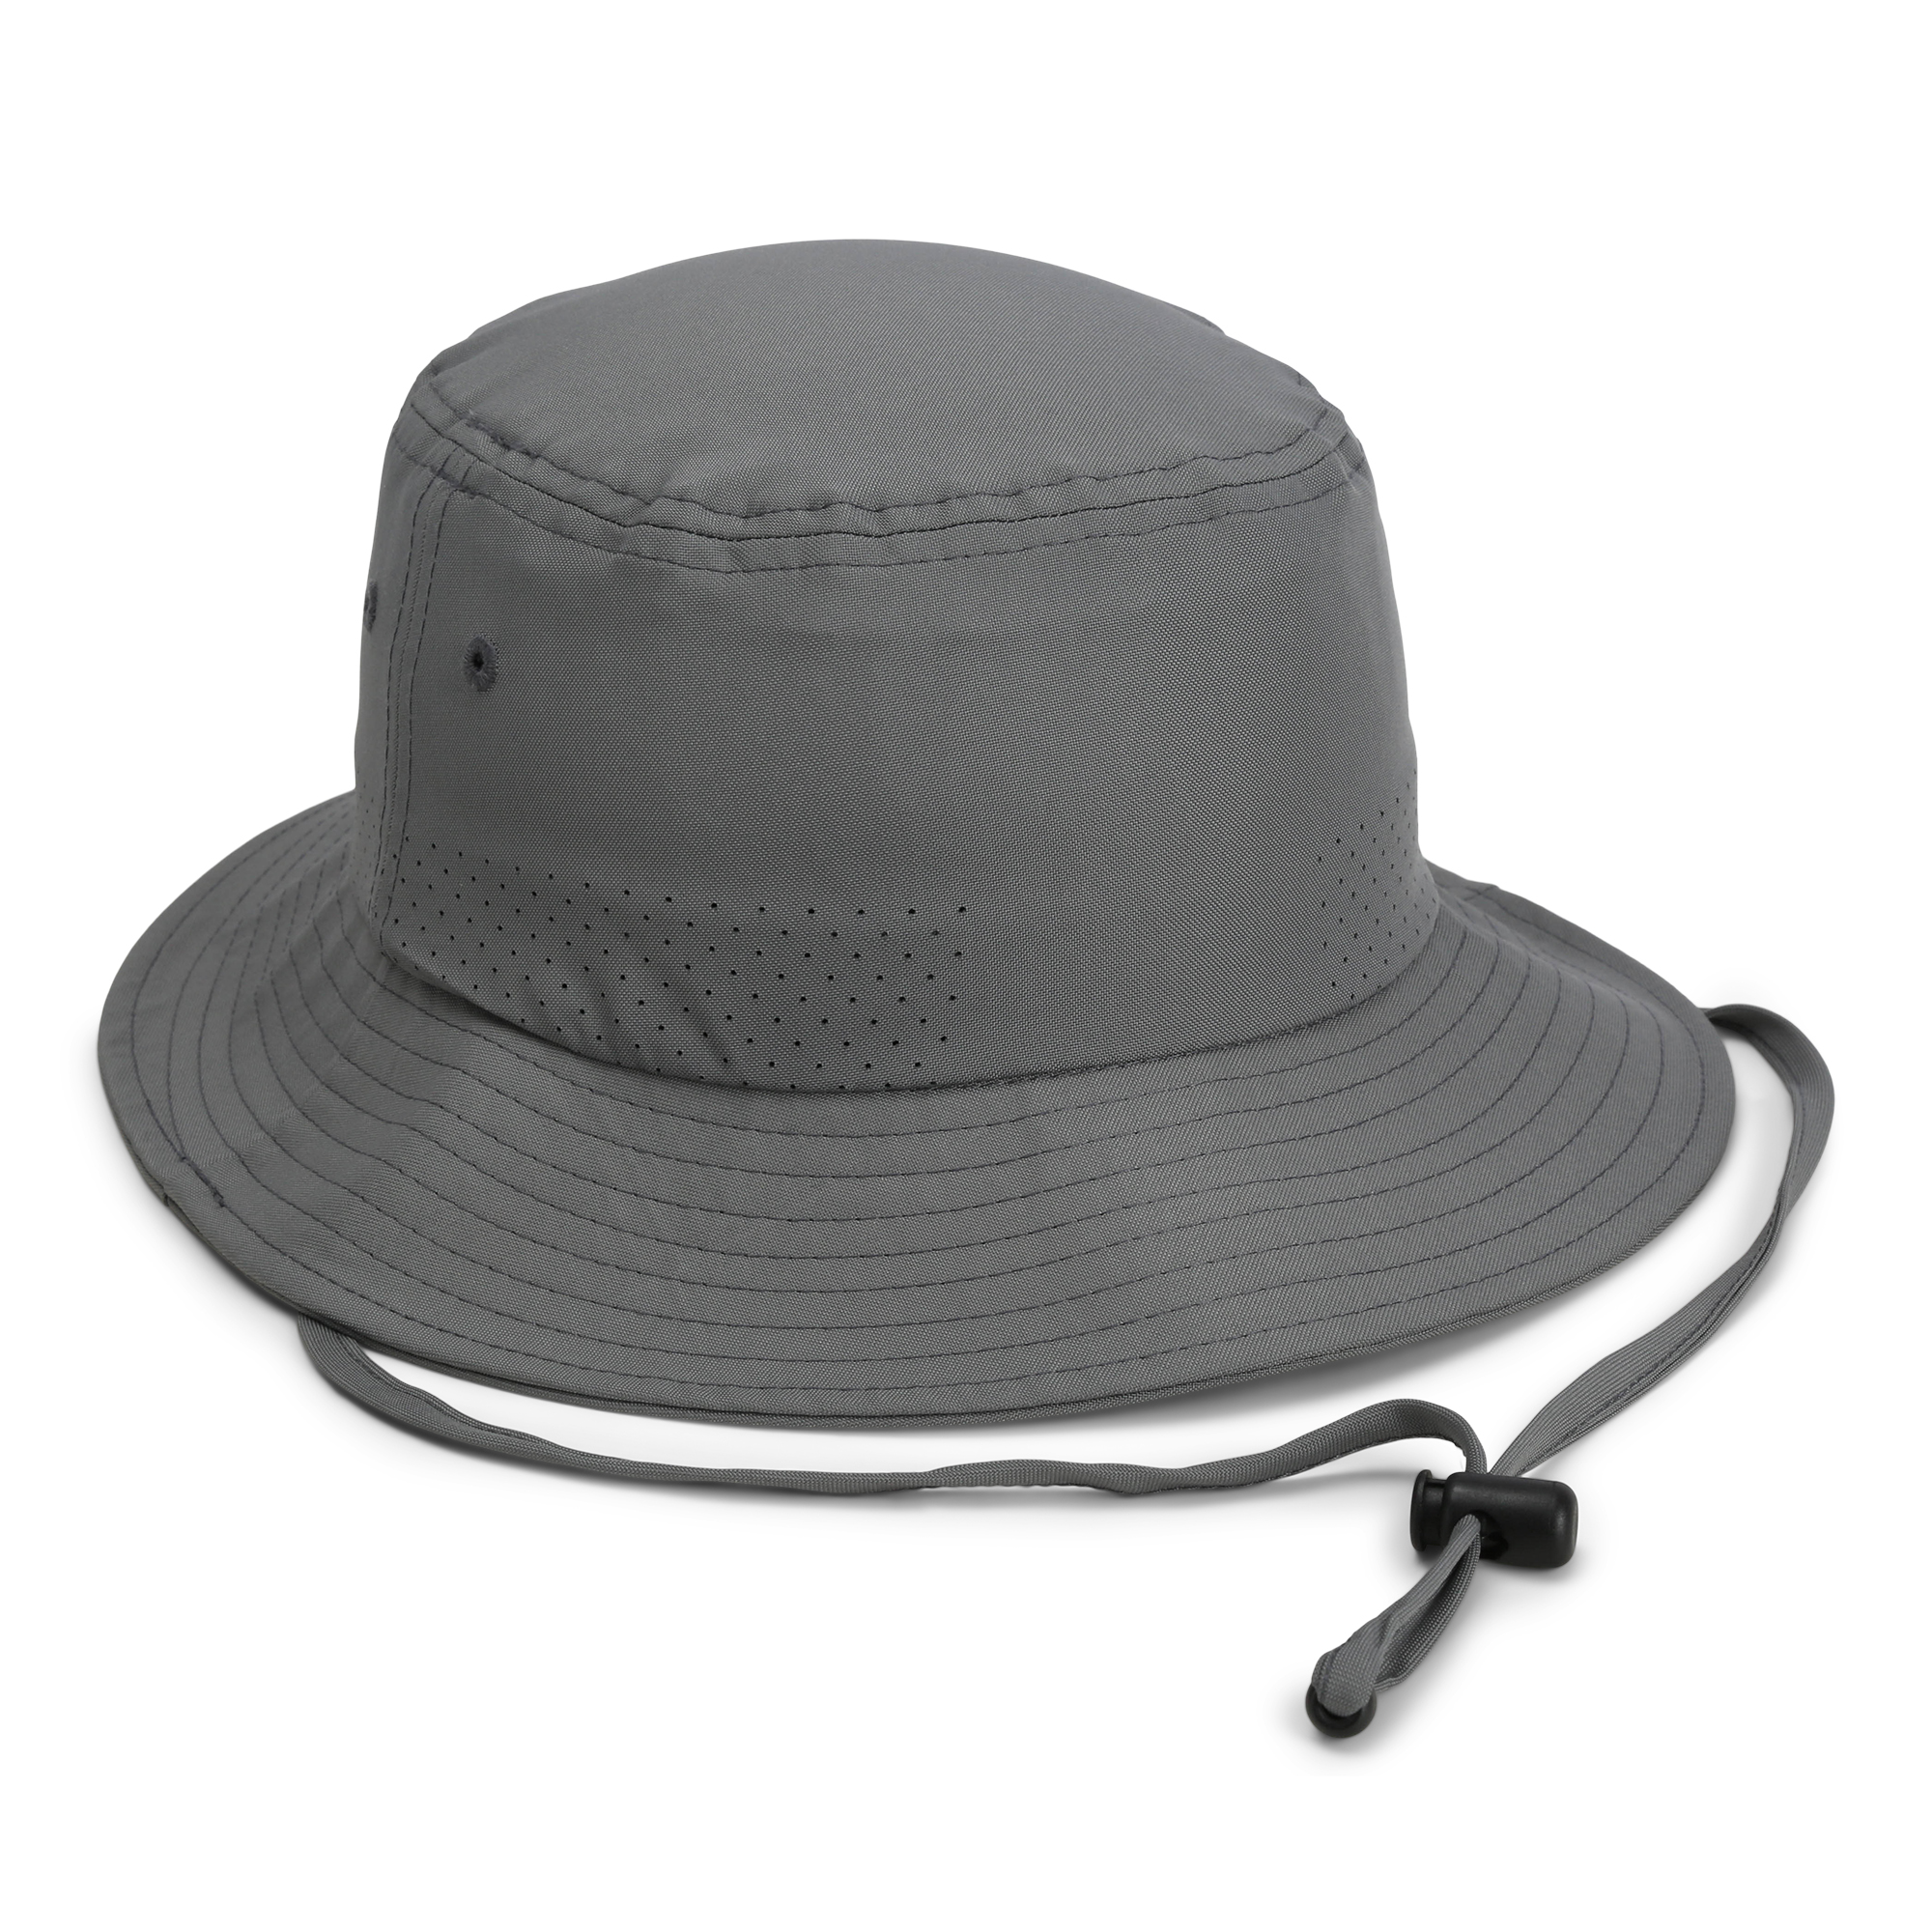 CC051 - The Geysir Cooling Sun-Protection Bucket Hat